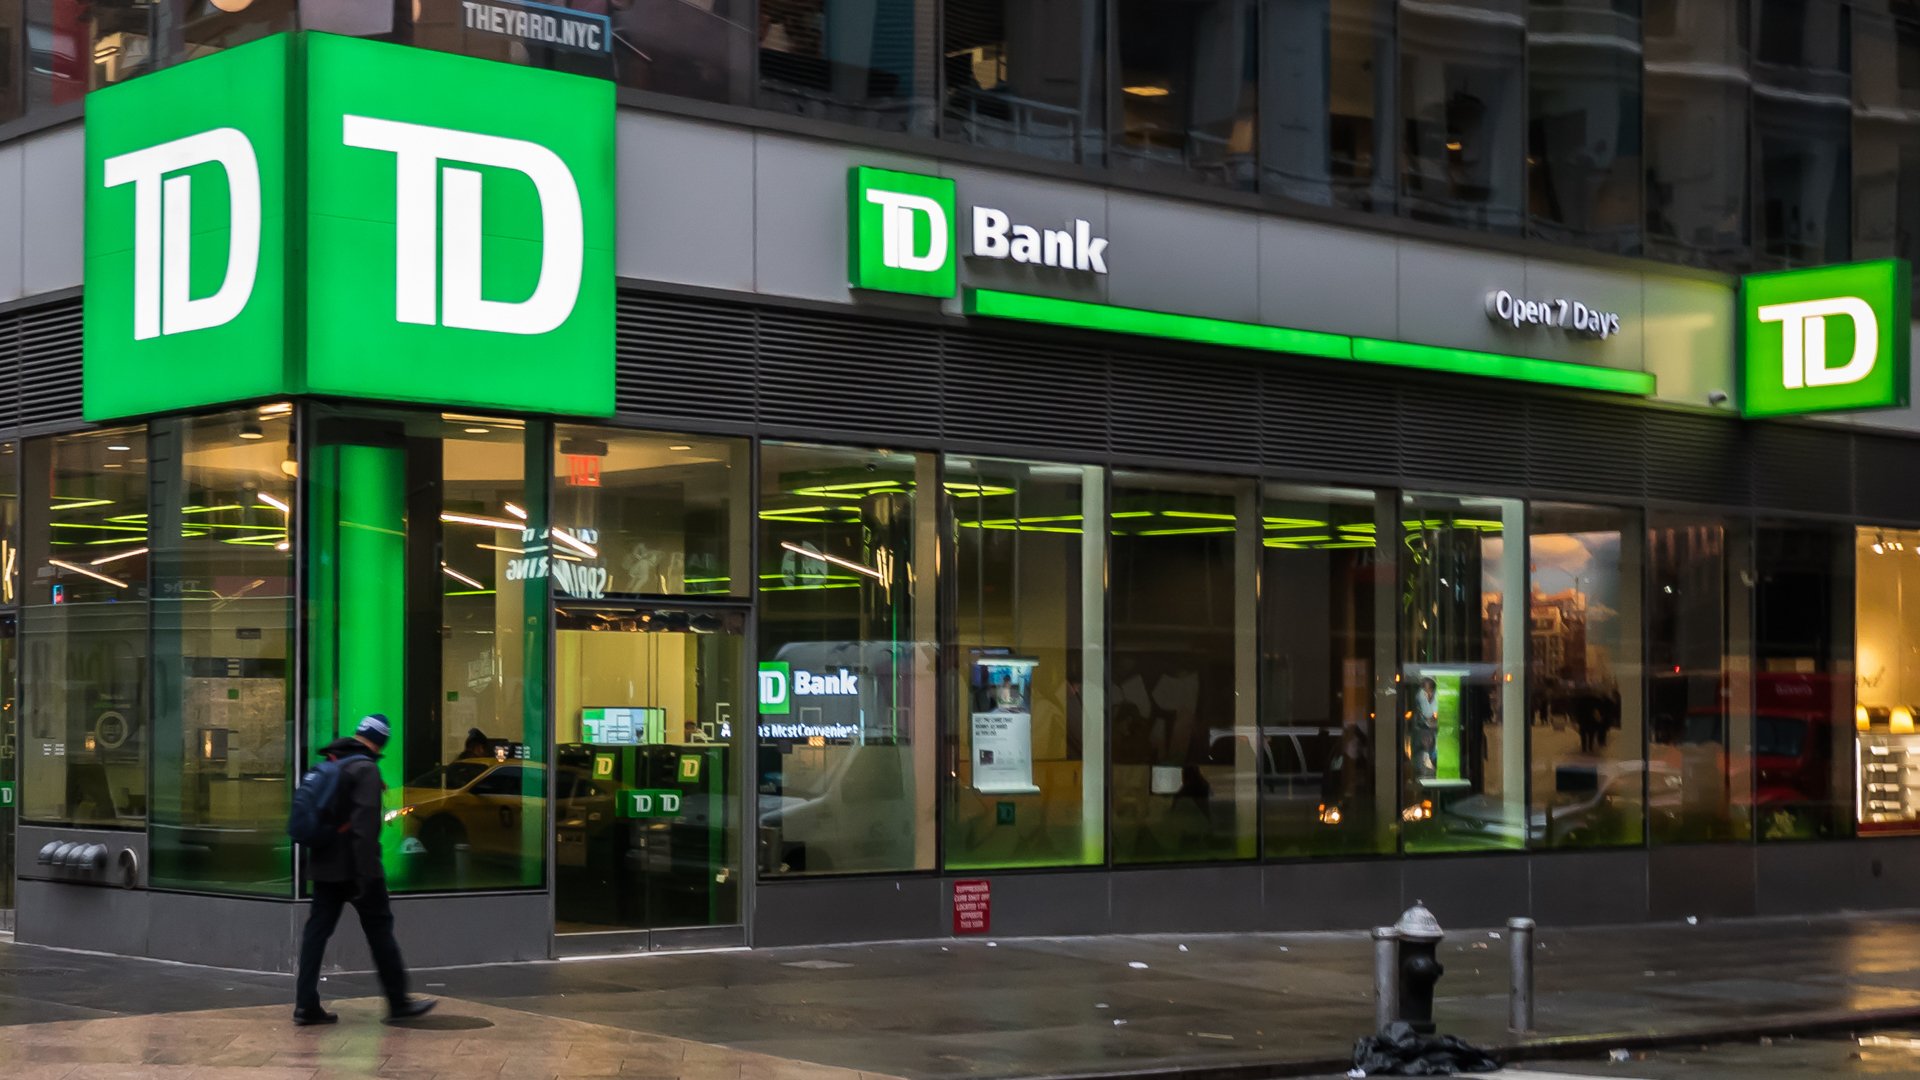 TD Bank logs - Online Banking Login For Carders 2021